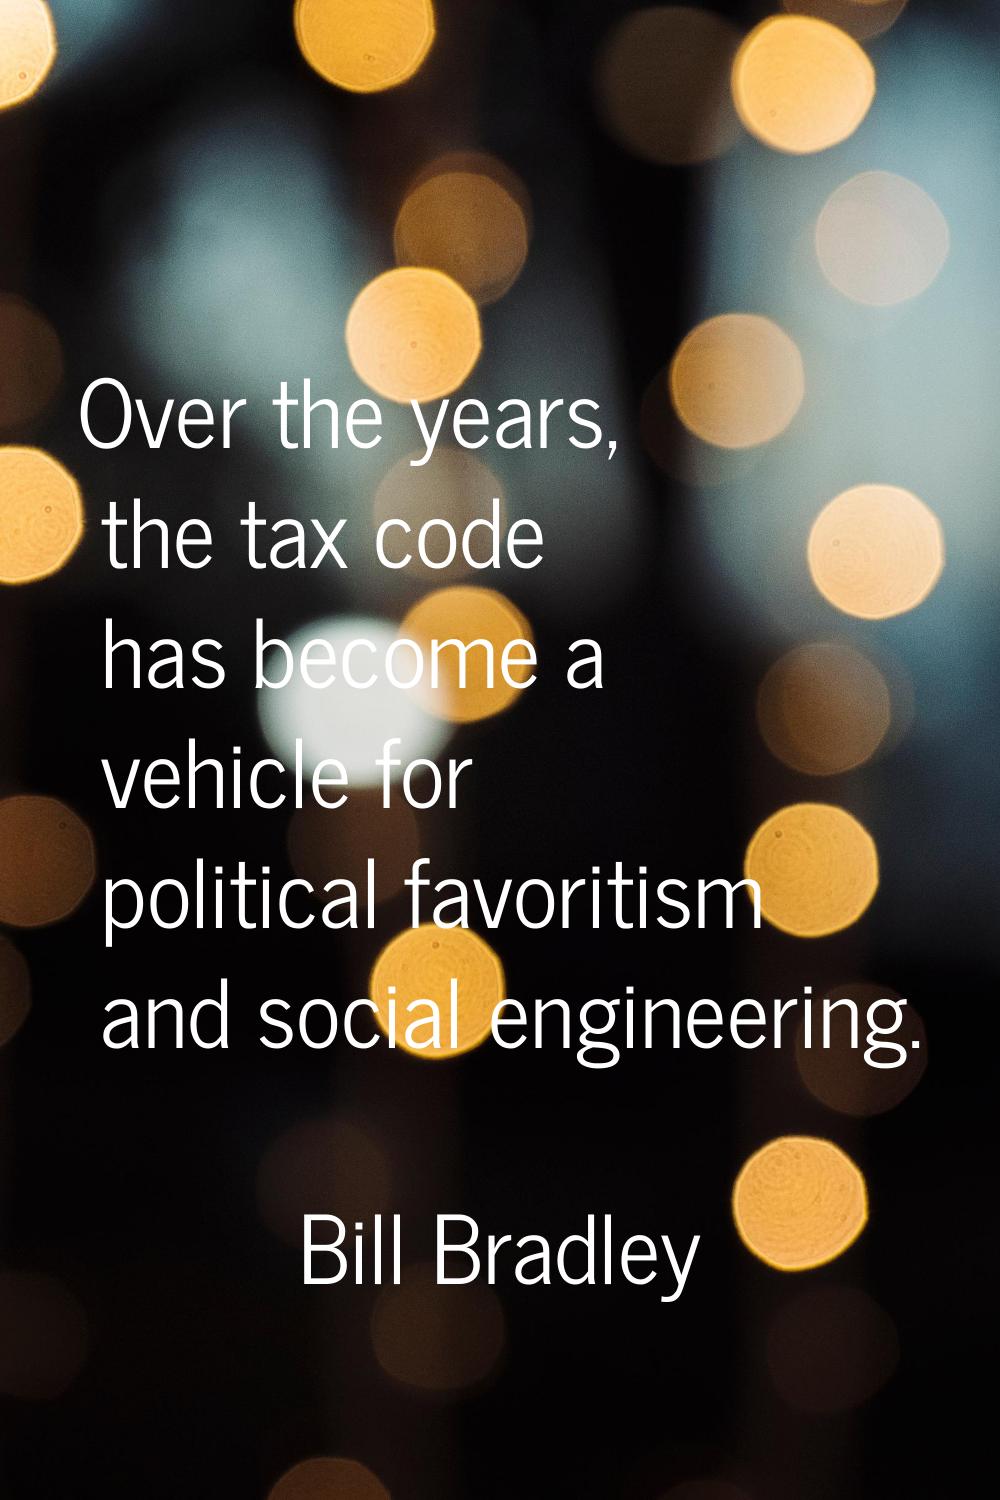 Over the years, the tax code has become a vehicle for political favoritism and social engineering.